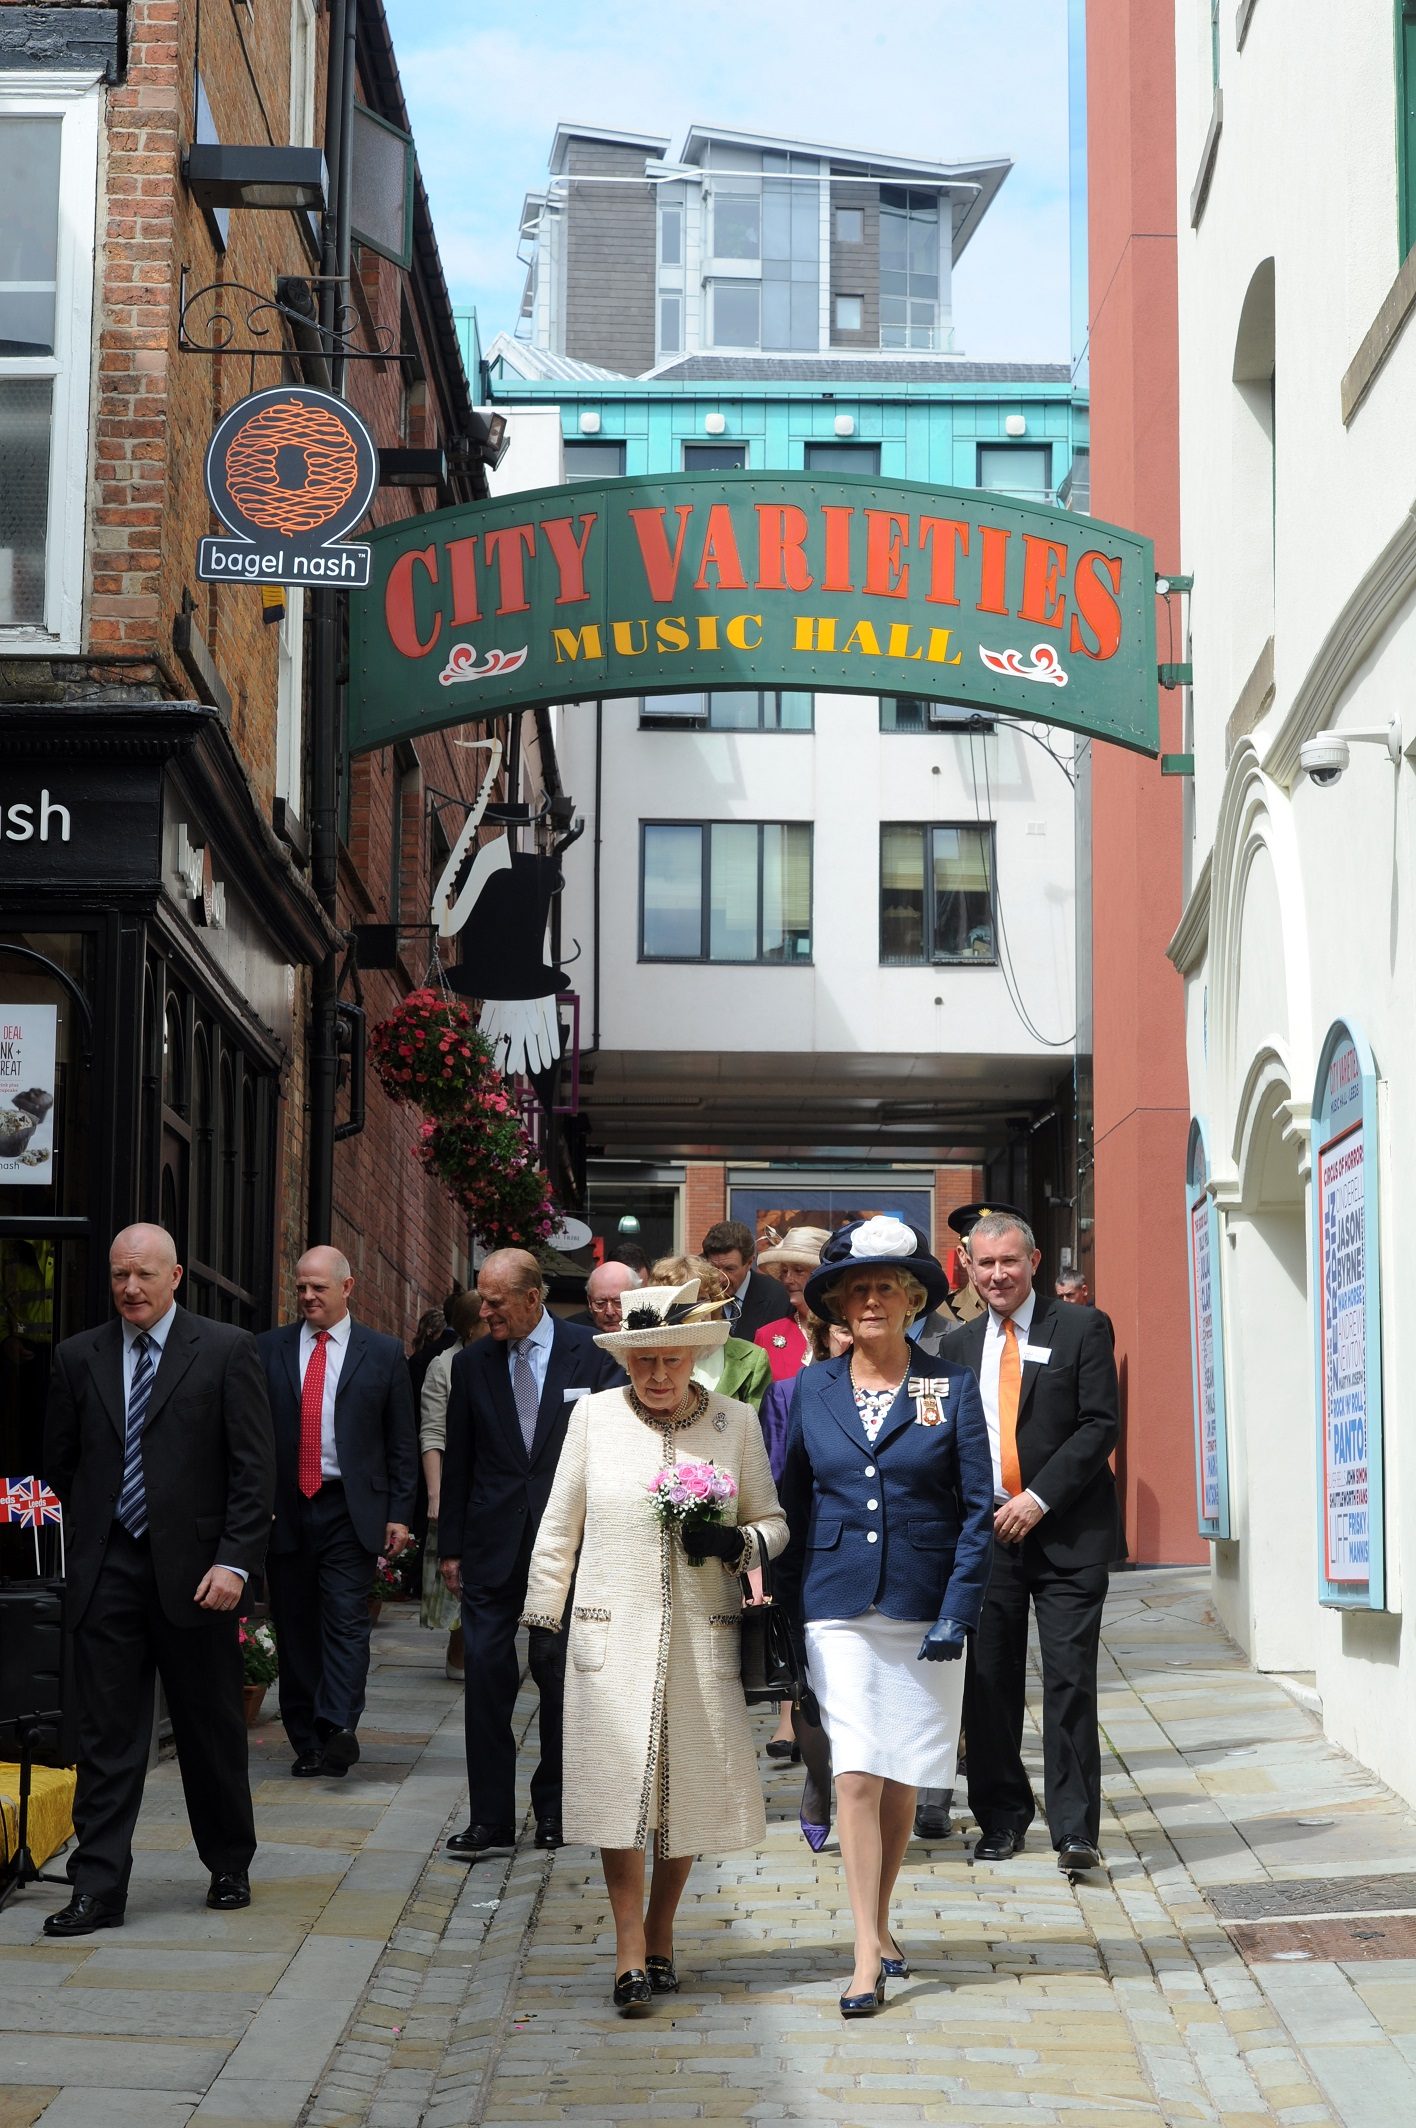 The Queen wearing a cream dress and hat followed by a group of people in suits walked down a narrow road. The sign above her reads City Varieties Music Hall.